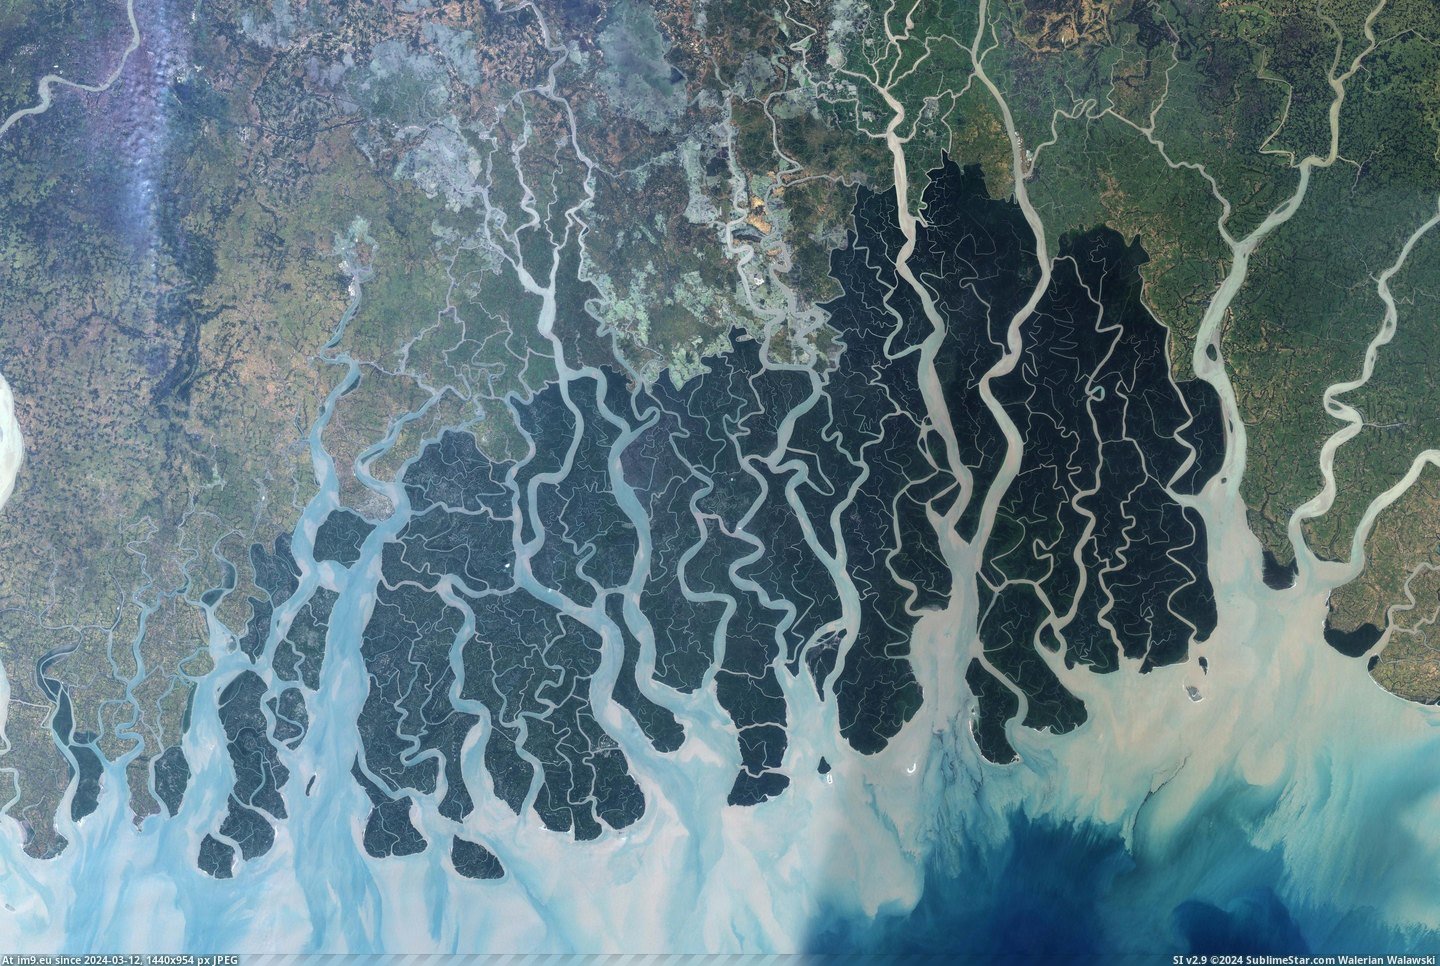 #Dark #Green #Bangladesh #2880x1920 #Sundarbans #Area #Reserve [Earthporn] The Sundarbans, Bangladesh. The dark green area is a reserve [2880x1920] Pic. (Image of album My r/EARTHPORN favs))